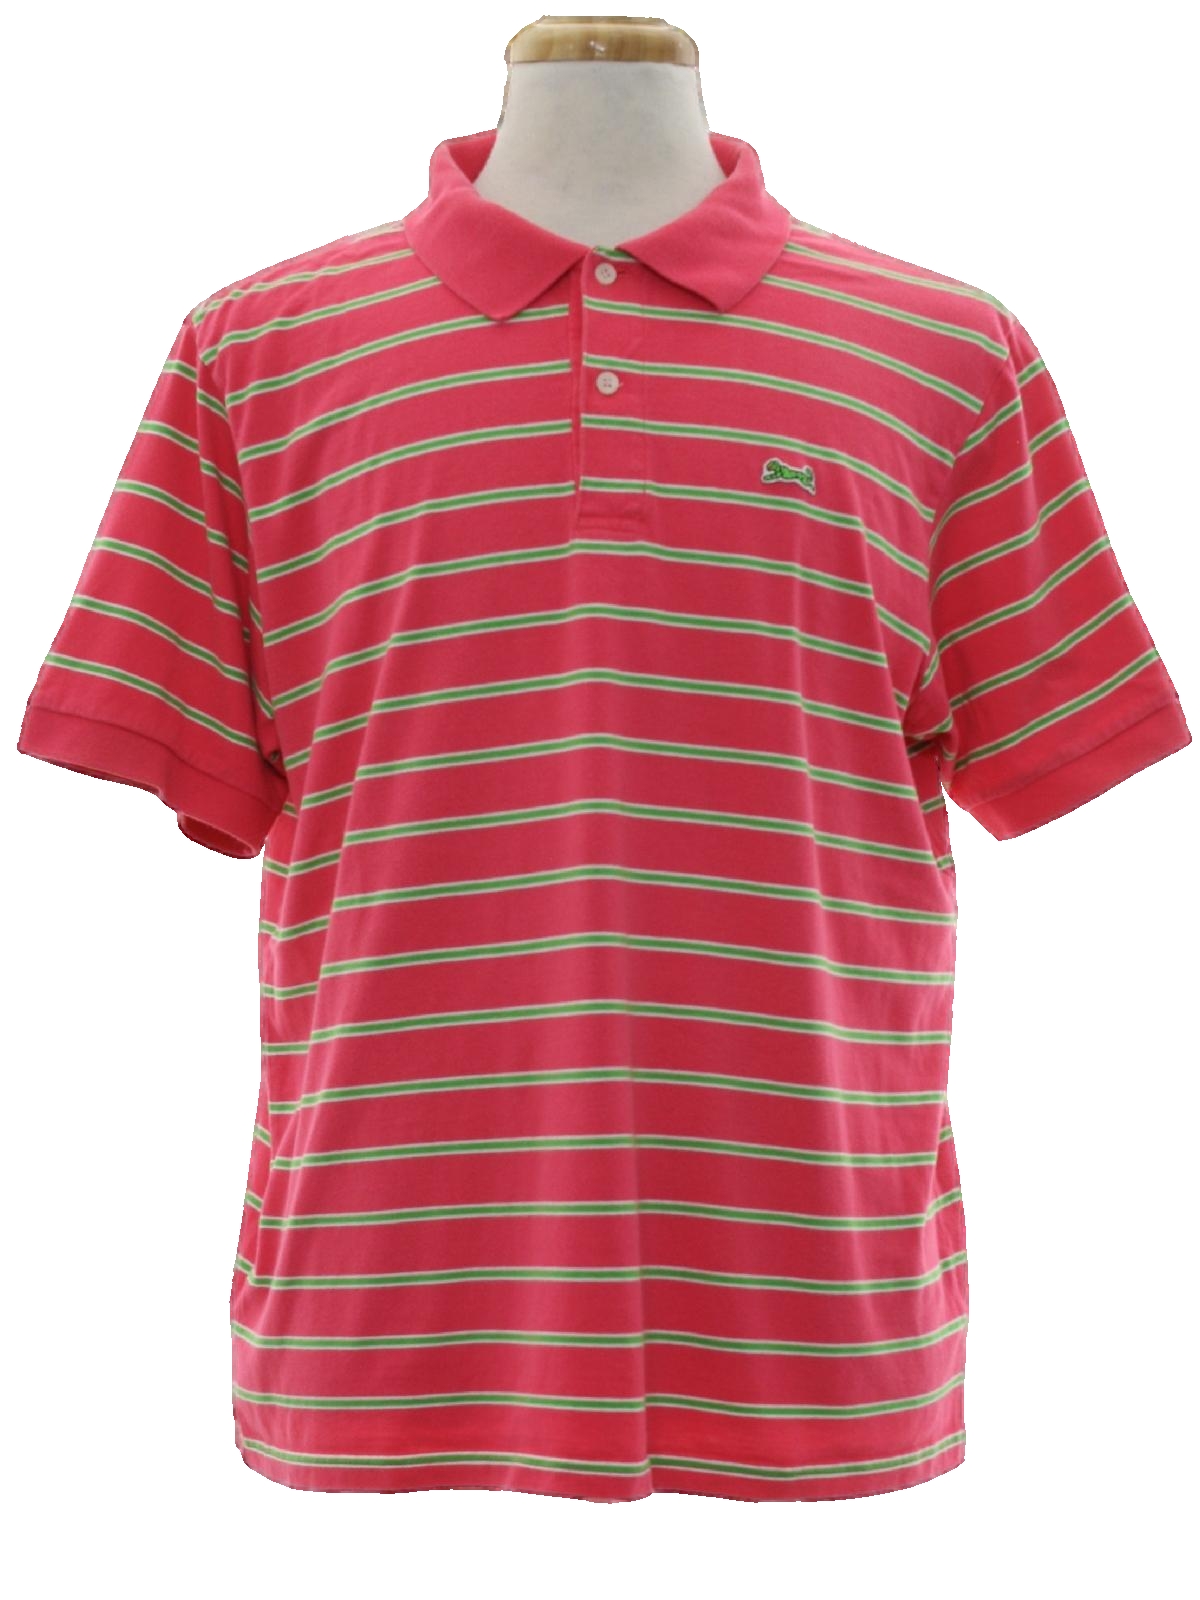 Vintage Le Tigre 80's Shirt: 80s -Le Tigre- Mens bright pink with green ...